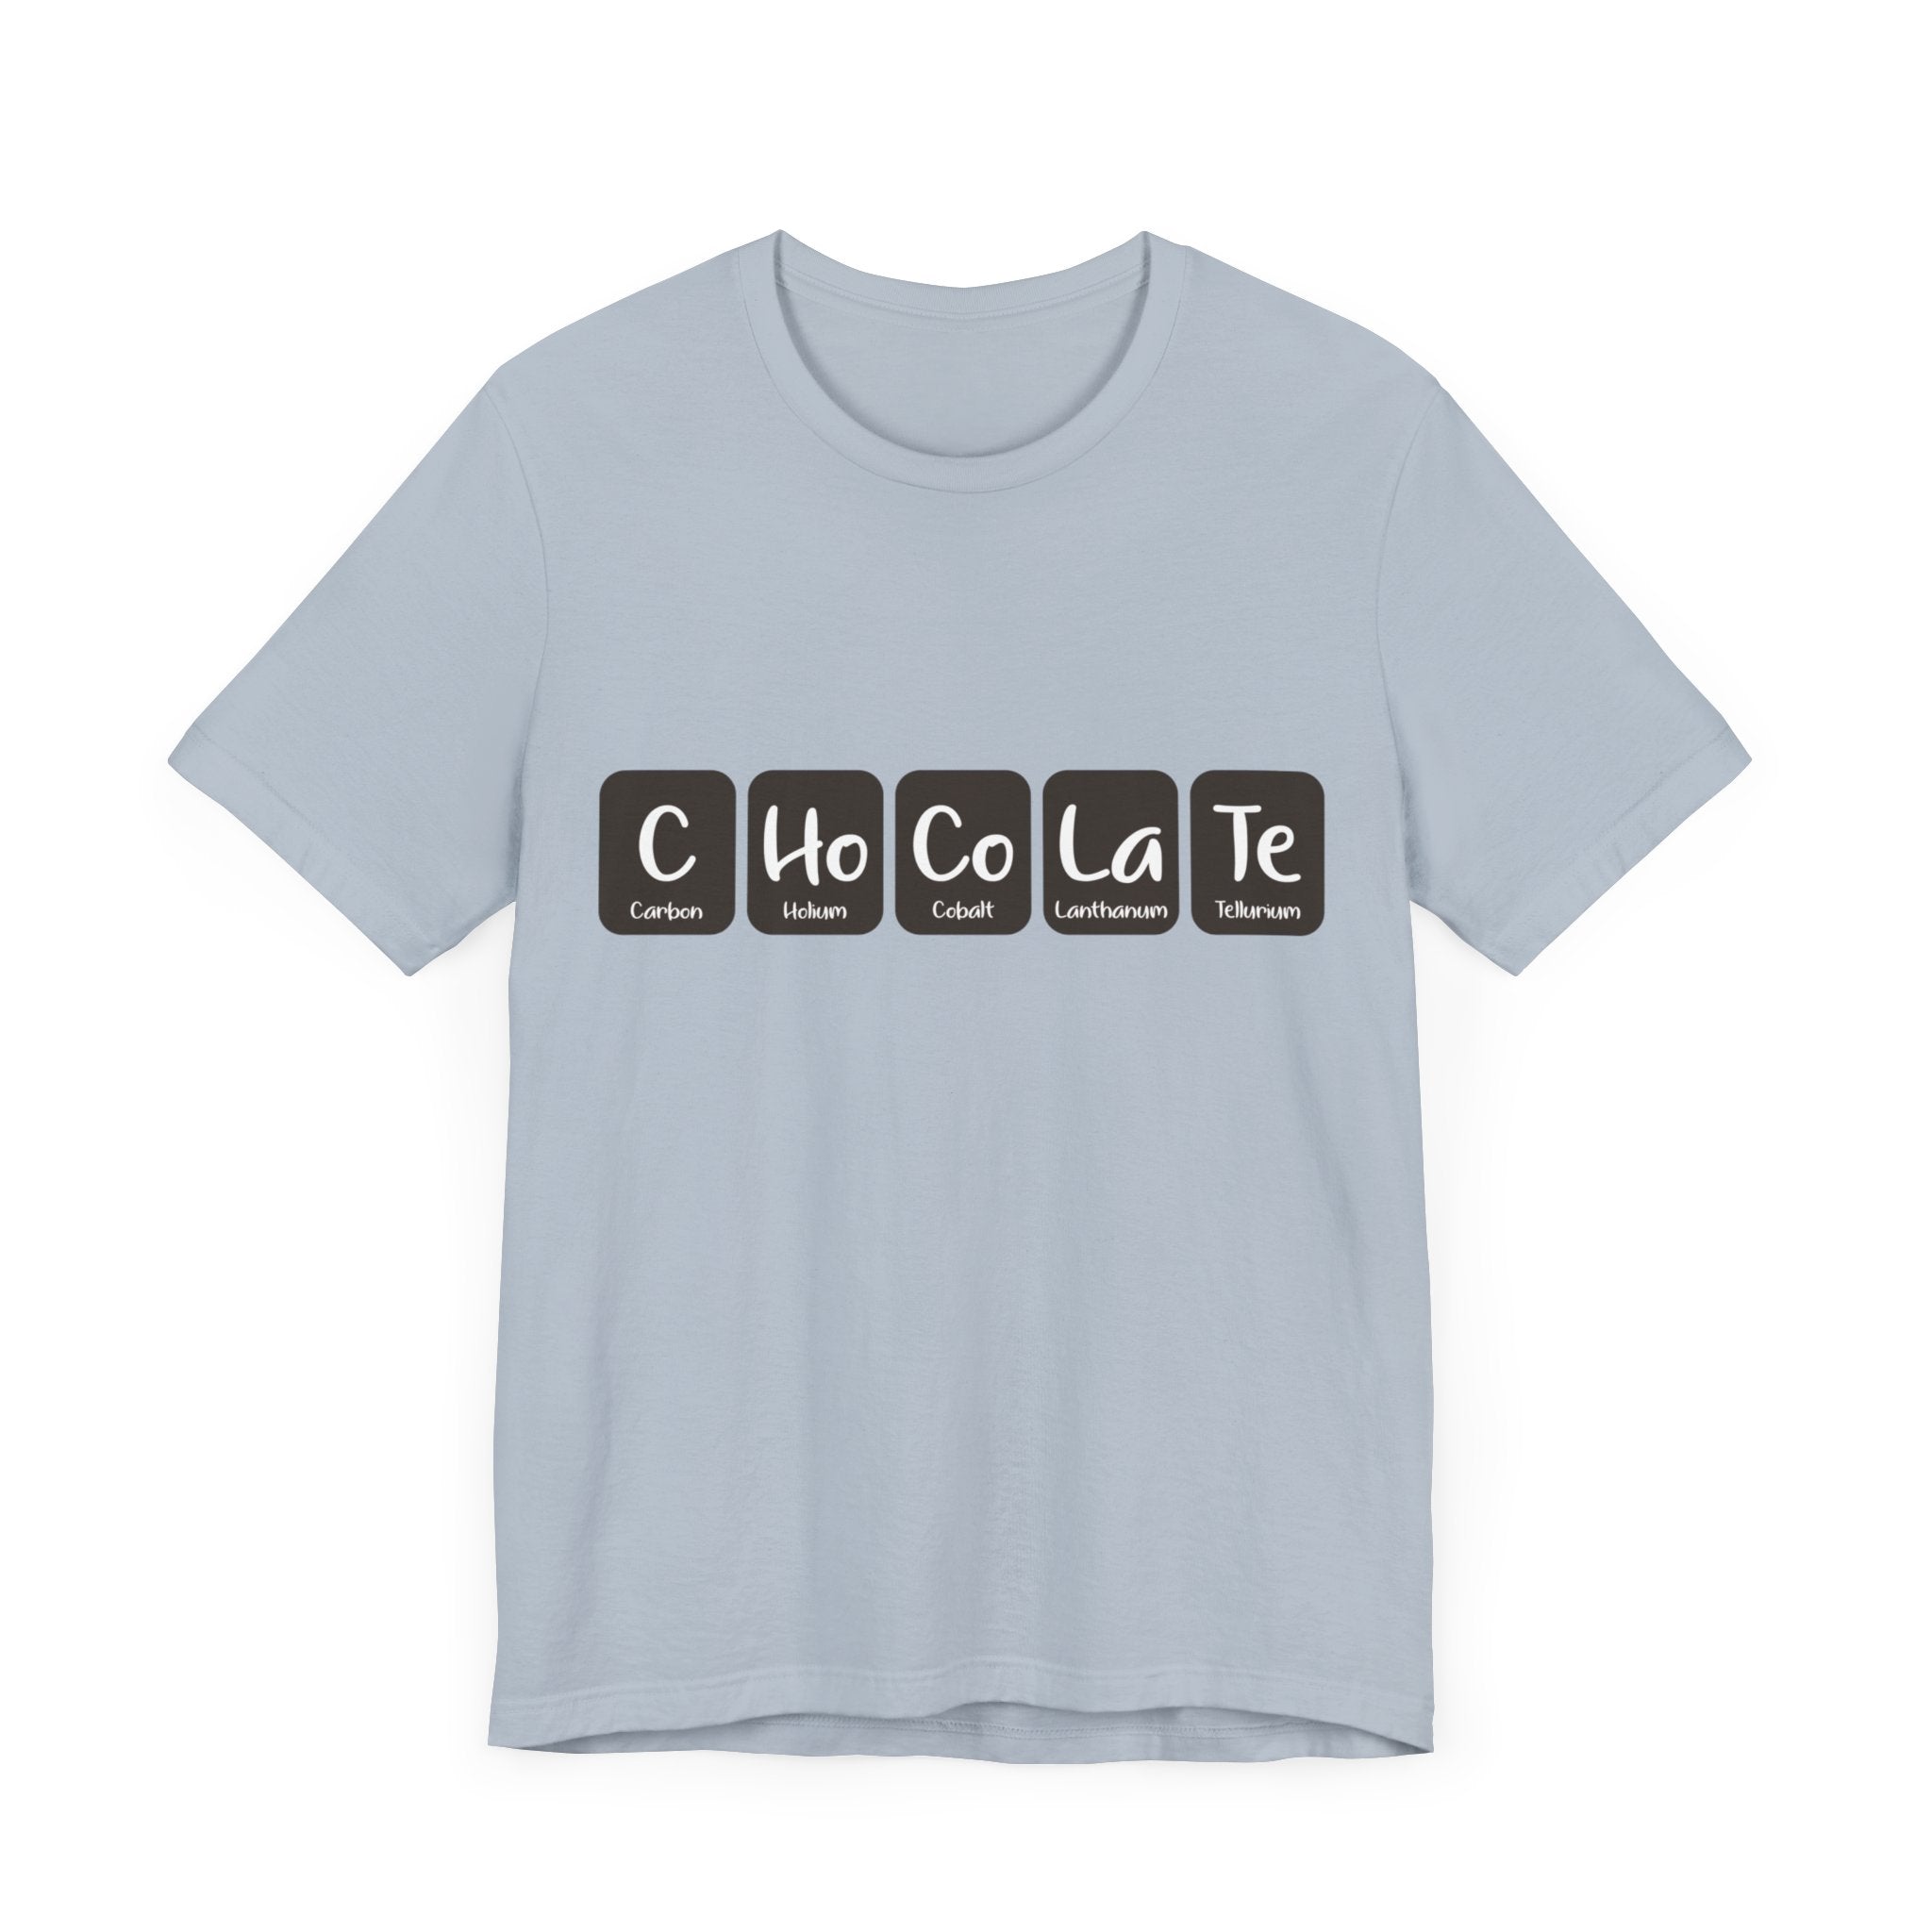 A light blue C-Ho-Co-La-Te - T-Shirt featuring a design with the word "Chocolate" spelled out using periodic table elements. Made from 100% Airlume cotton, this fashionable tee offers both comfort and style.